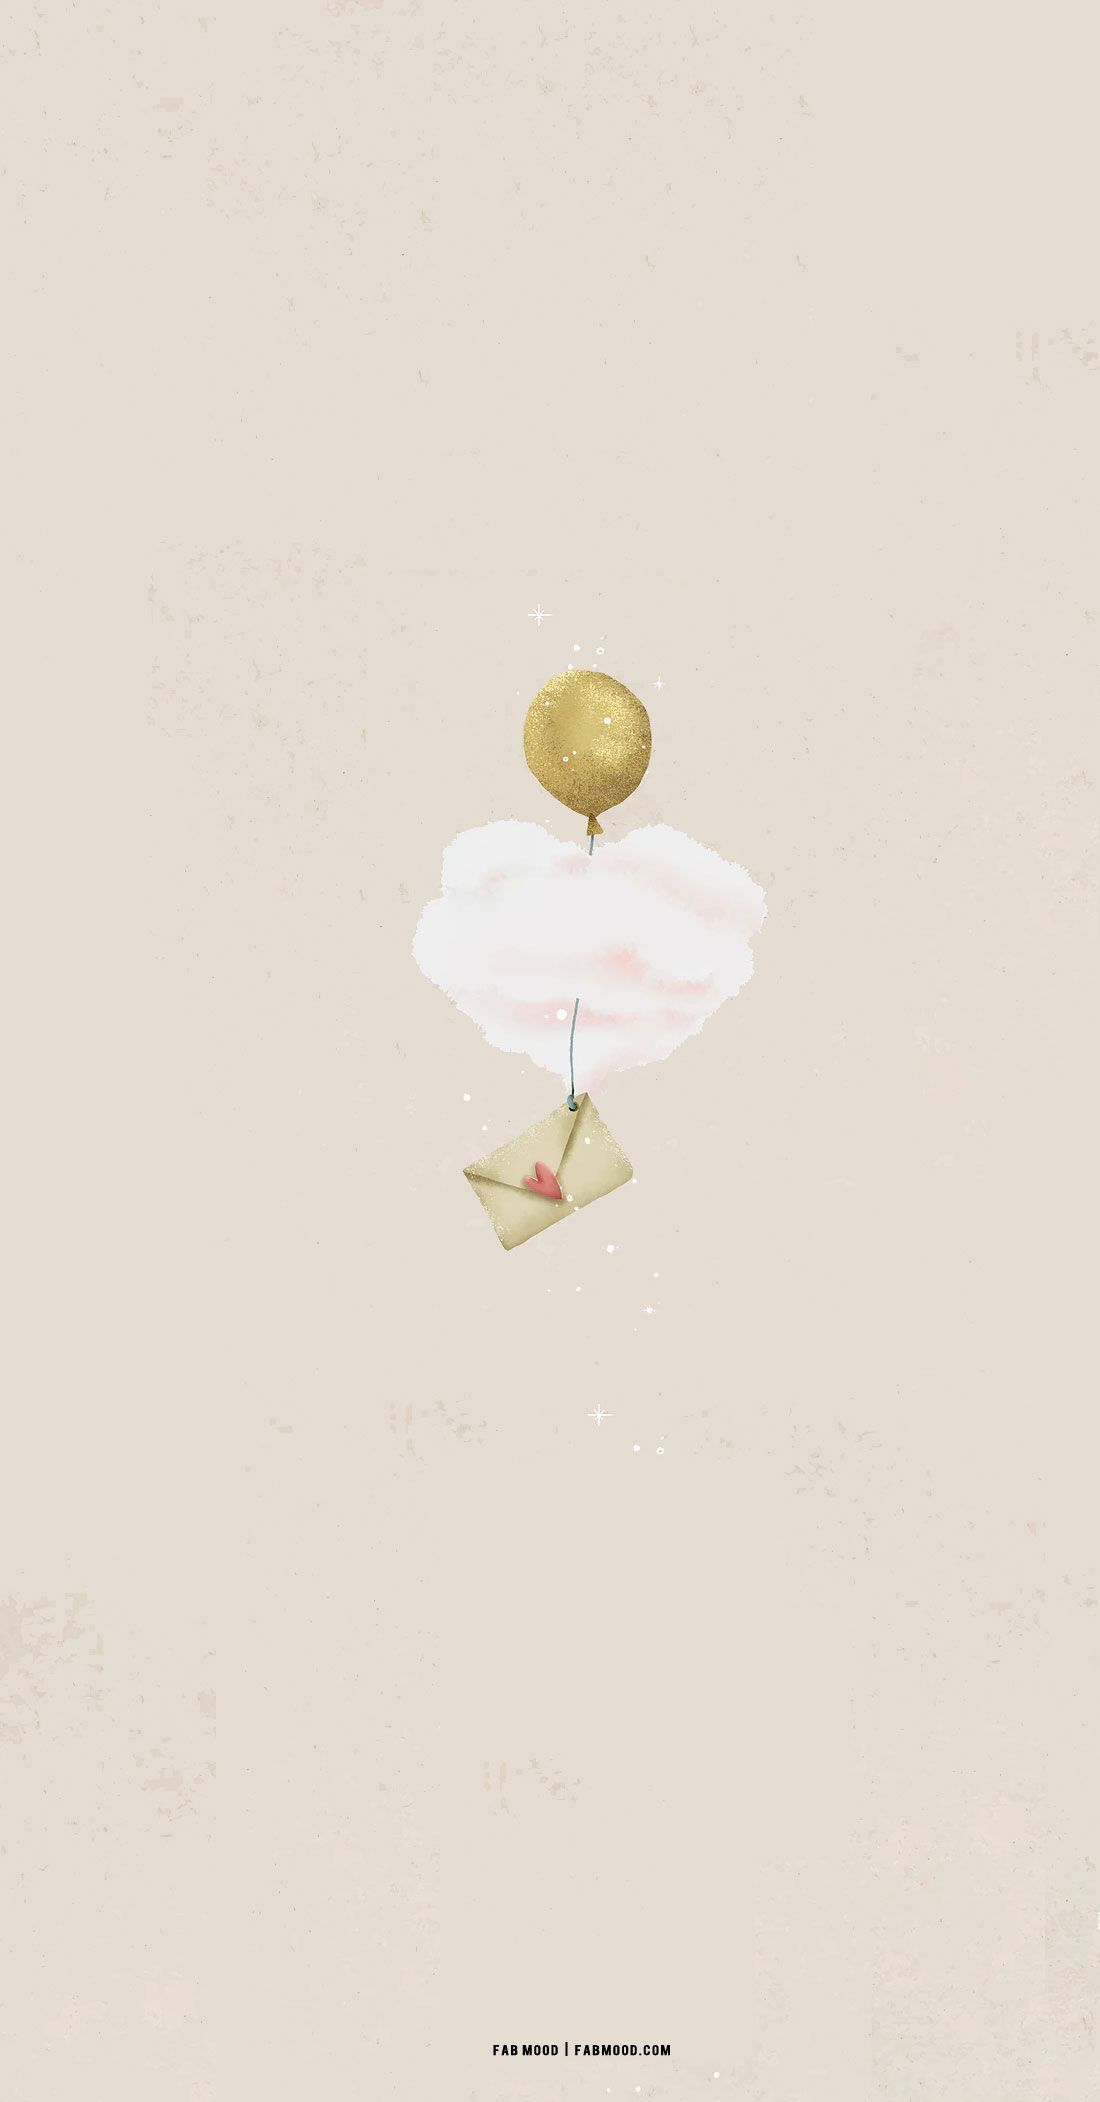 A letter and a balloon floating in the sky - Cupid, warm